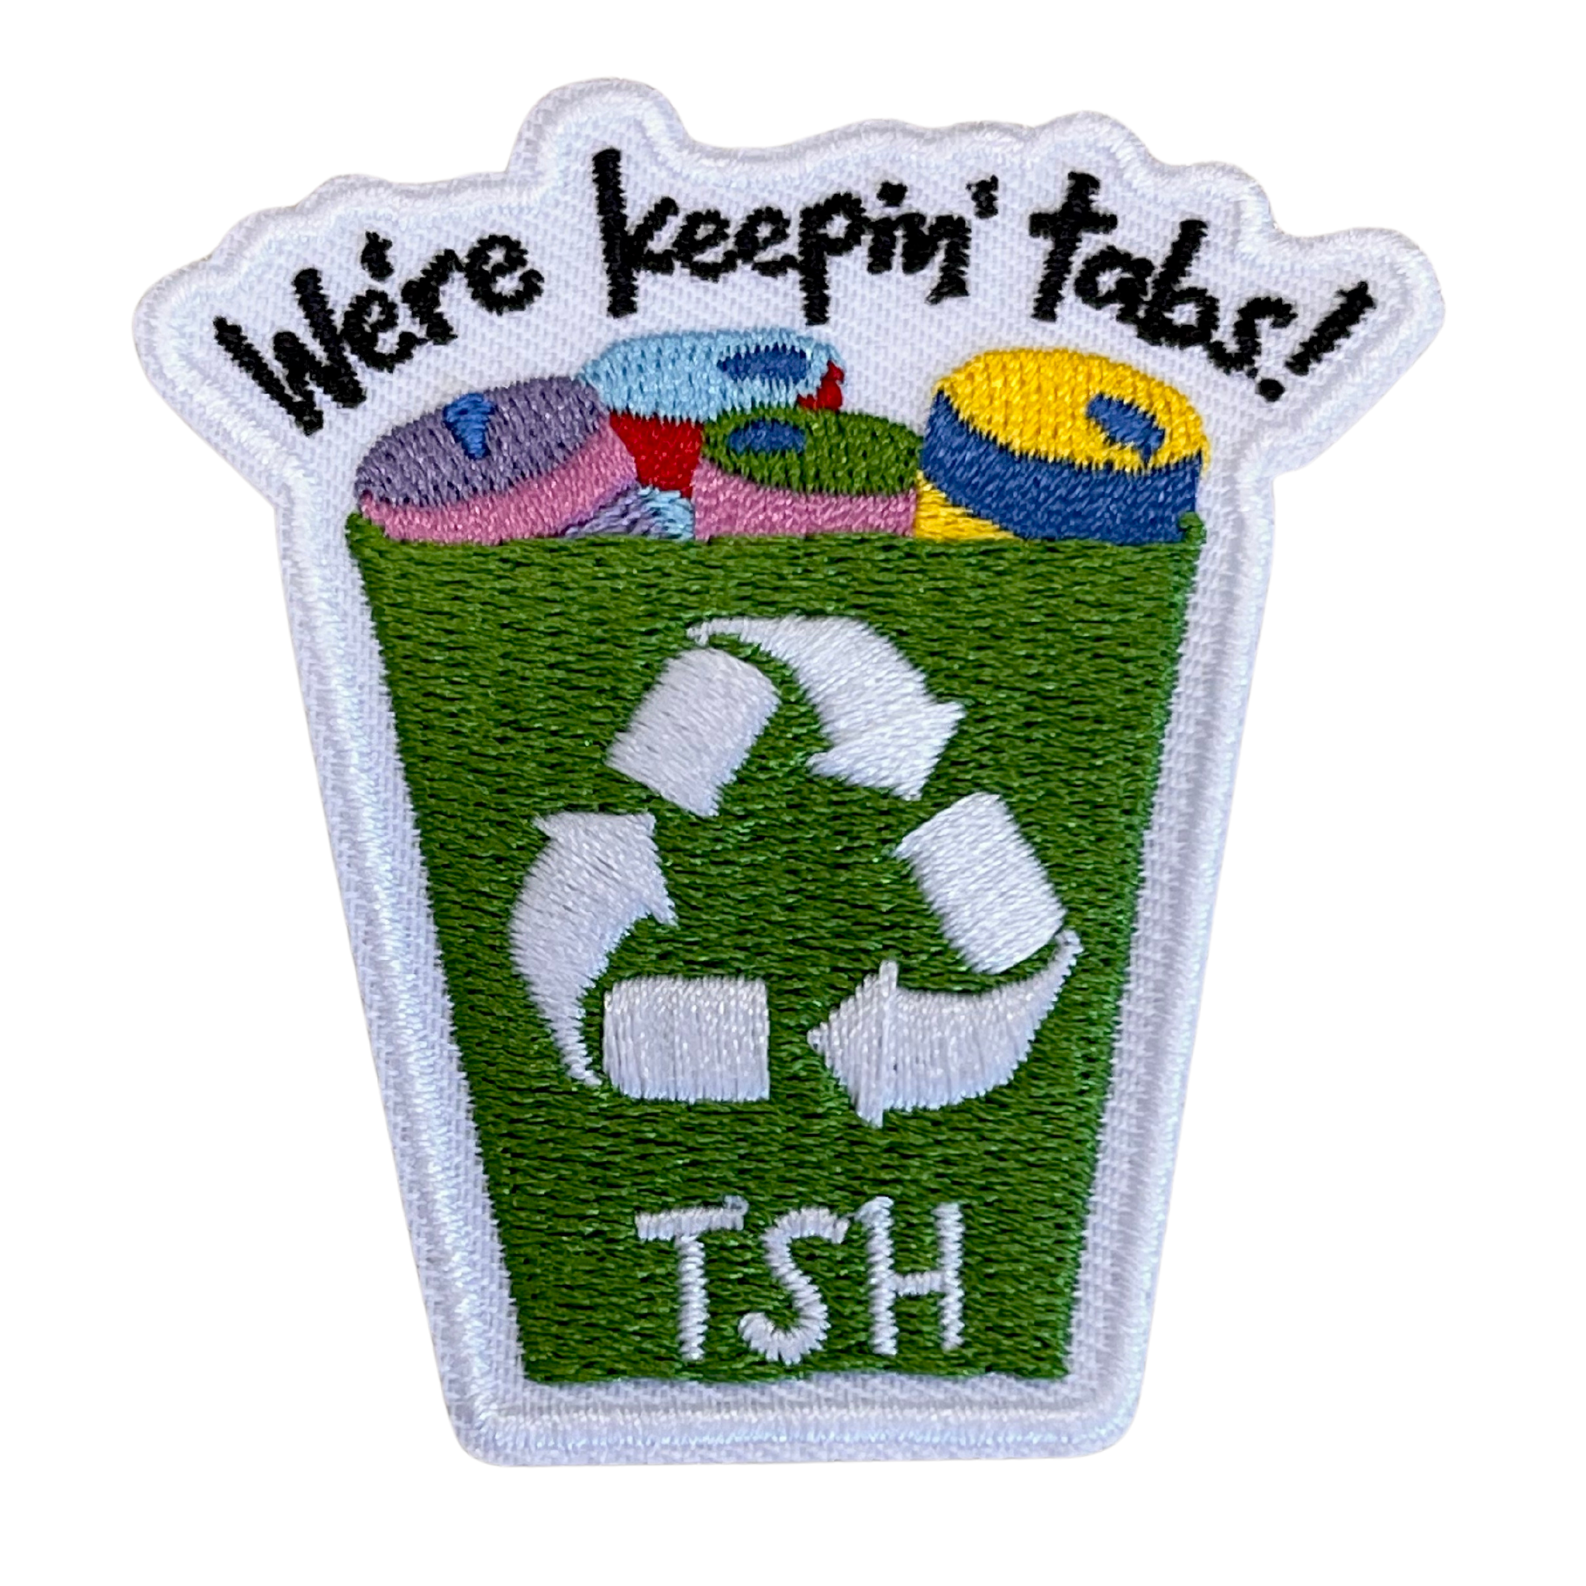 Recycle Mission October 2022 Patch - TinySuperheroes